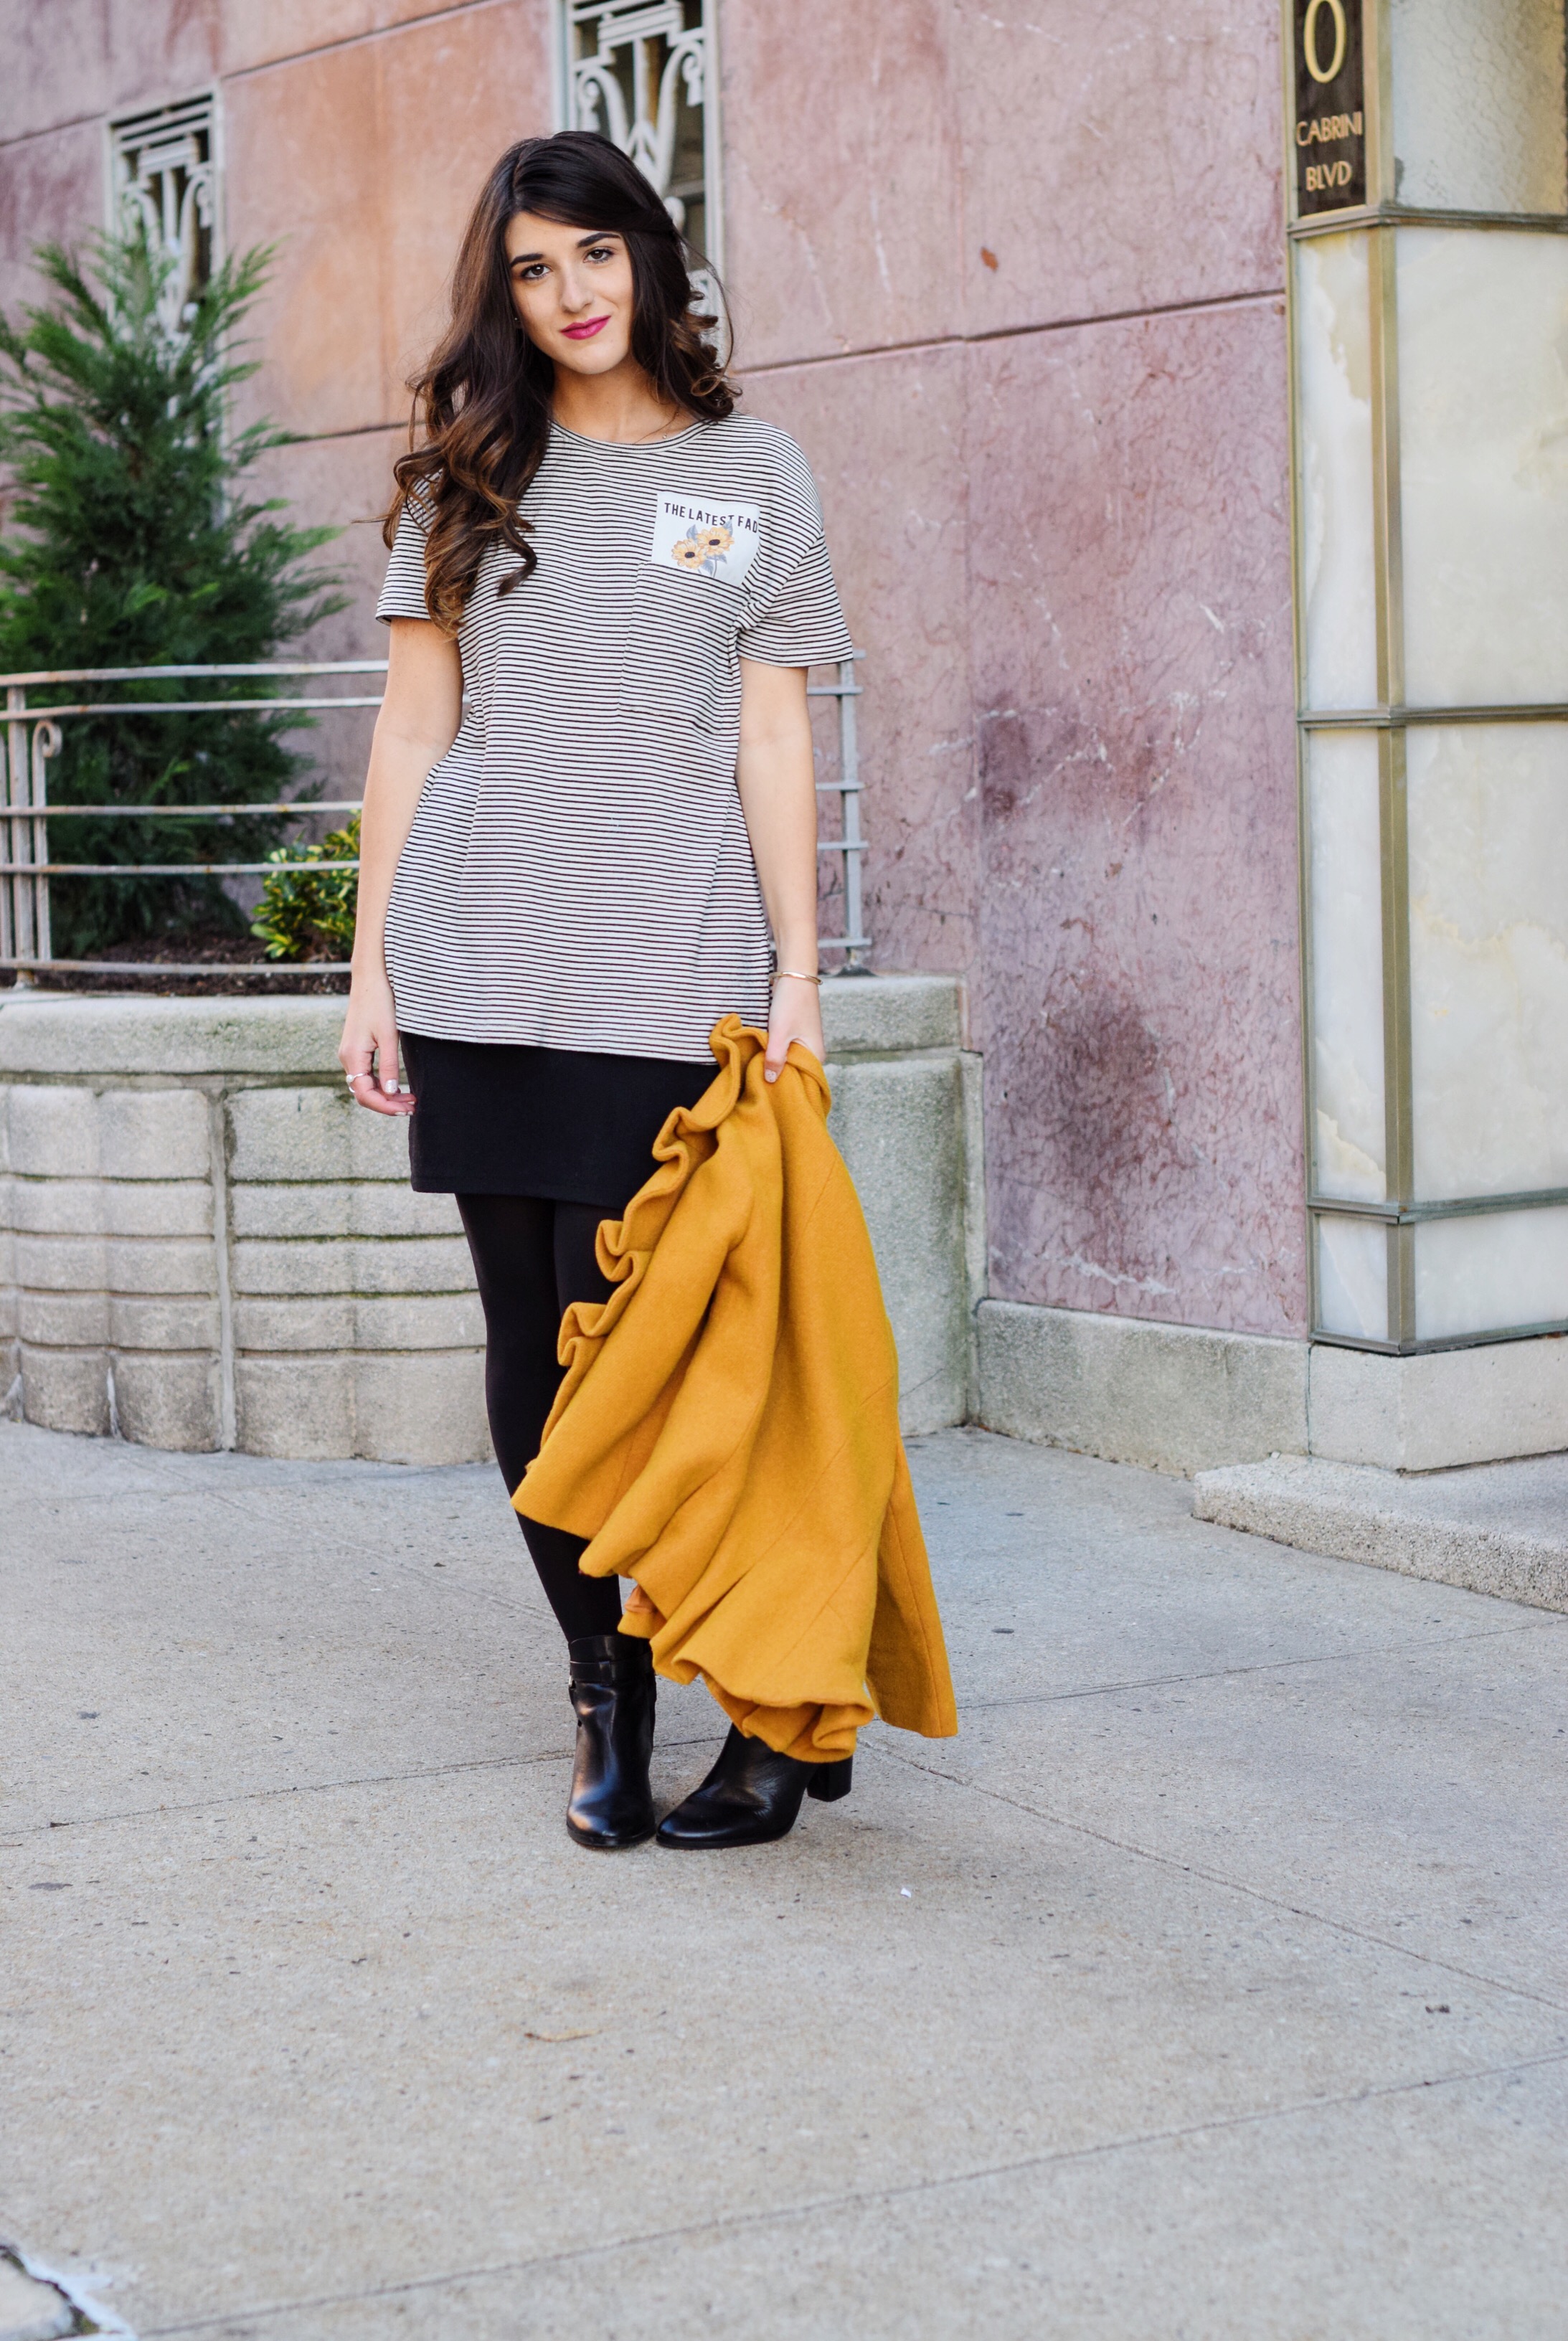 Yellow Ruffled Jacket Striped Tee Louboutins & Love Fashion Blog Esther Santer NYC Street Style Blogger Zara Pocket Tshirt Outfit OOTD Inspo Inspiration Photoshoot New York City Black Booties Louise et Cie Nordstrom Hair Shoes Fall Girl Women Shopping.jpg